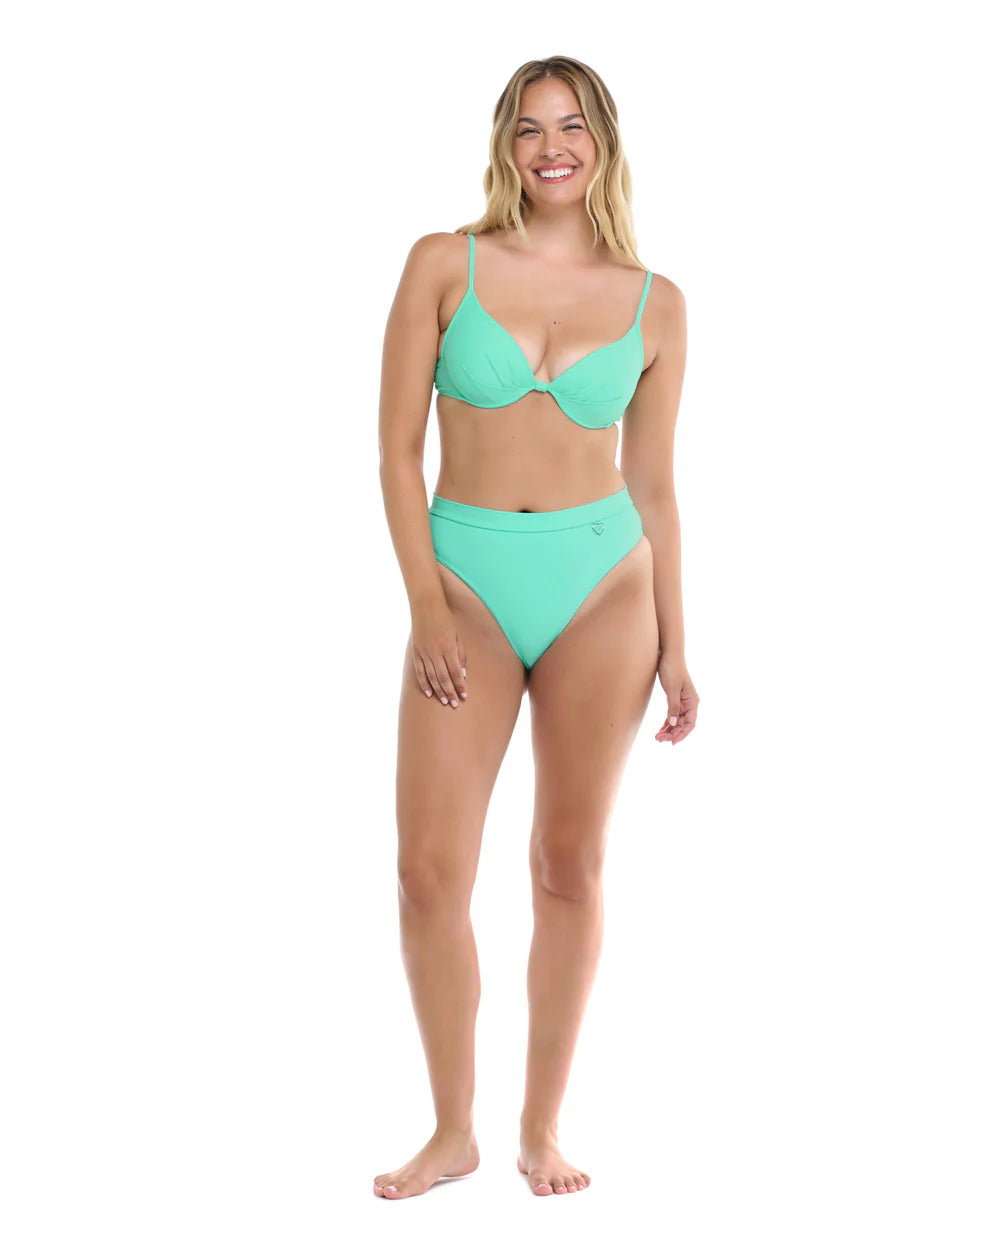 Body Glove Smoothies Greta Bikini top  Nylon/Spandex  Back straps can be straight or crossed Hand wash cold water Top and bottom sold separately Front View